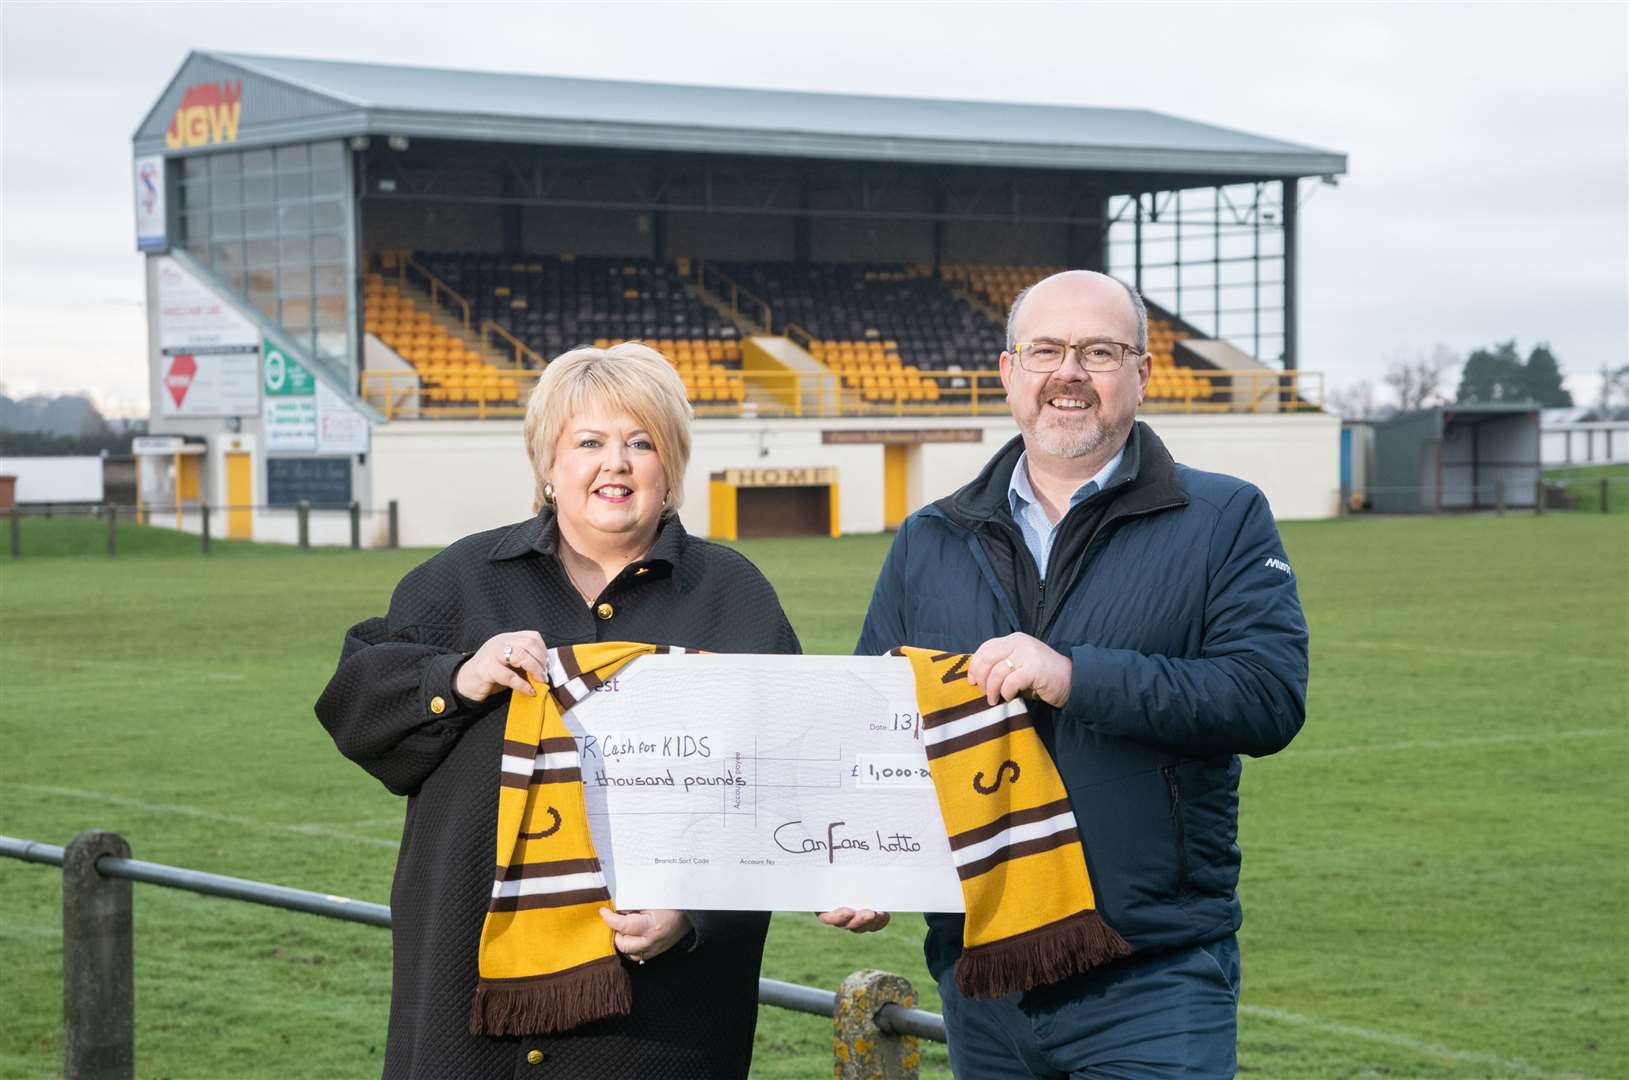 Pamela Brown accepts a cheque for £1000 for Cash for Kids from Graham Alexander of the club’s Cans Fans Lotto. Picture: Daniel Forsyth